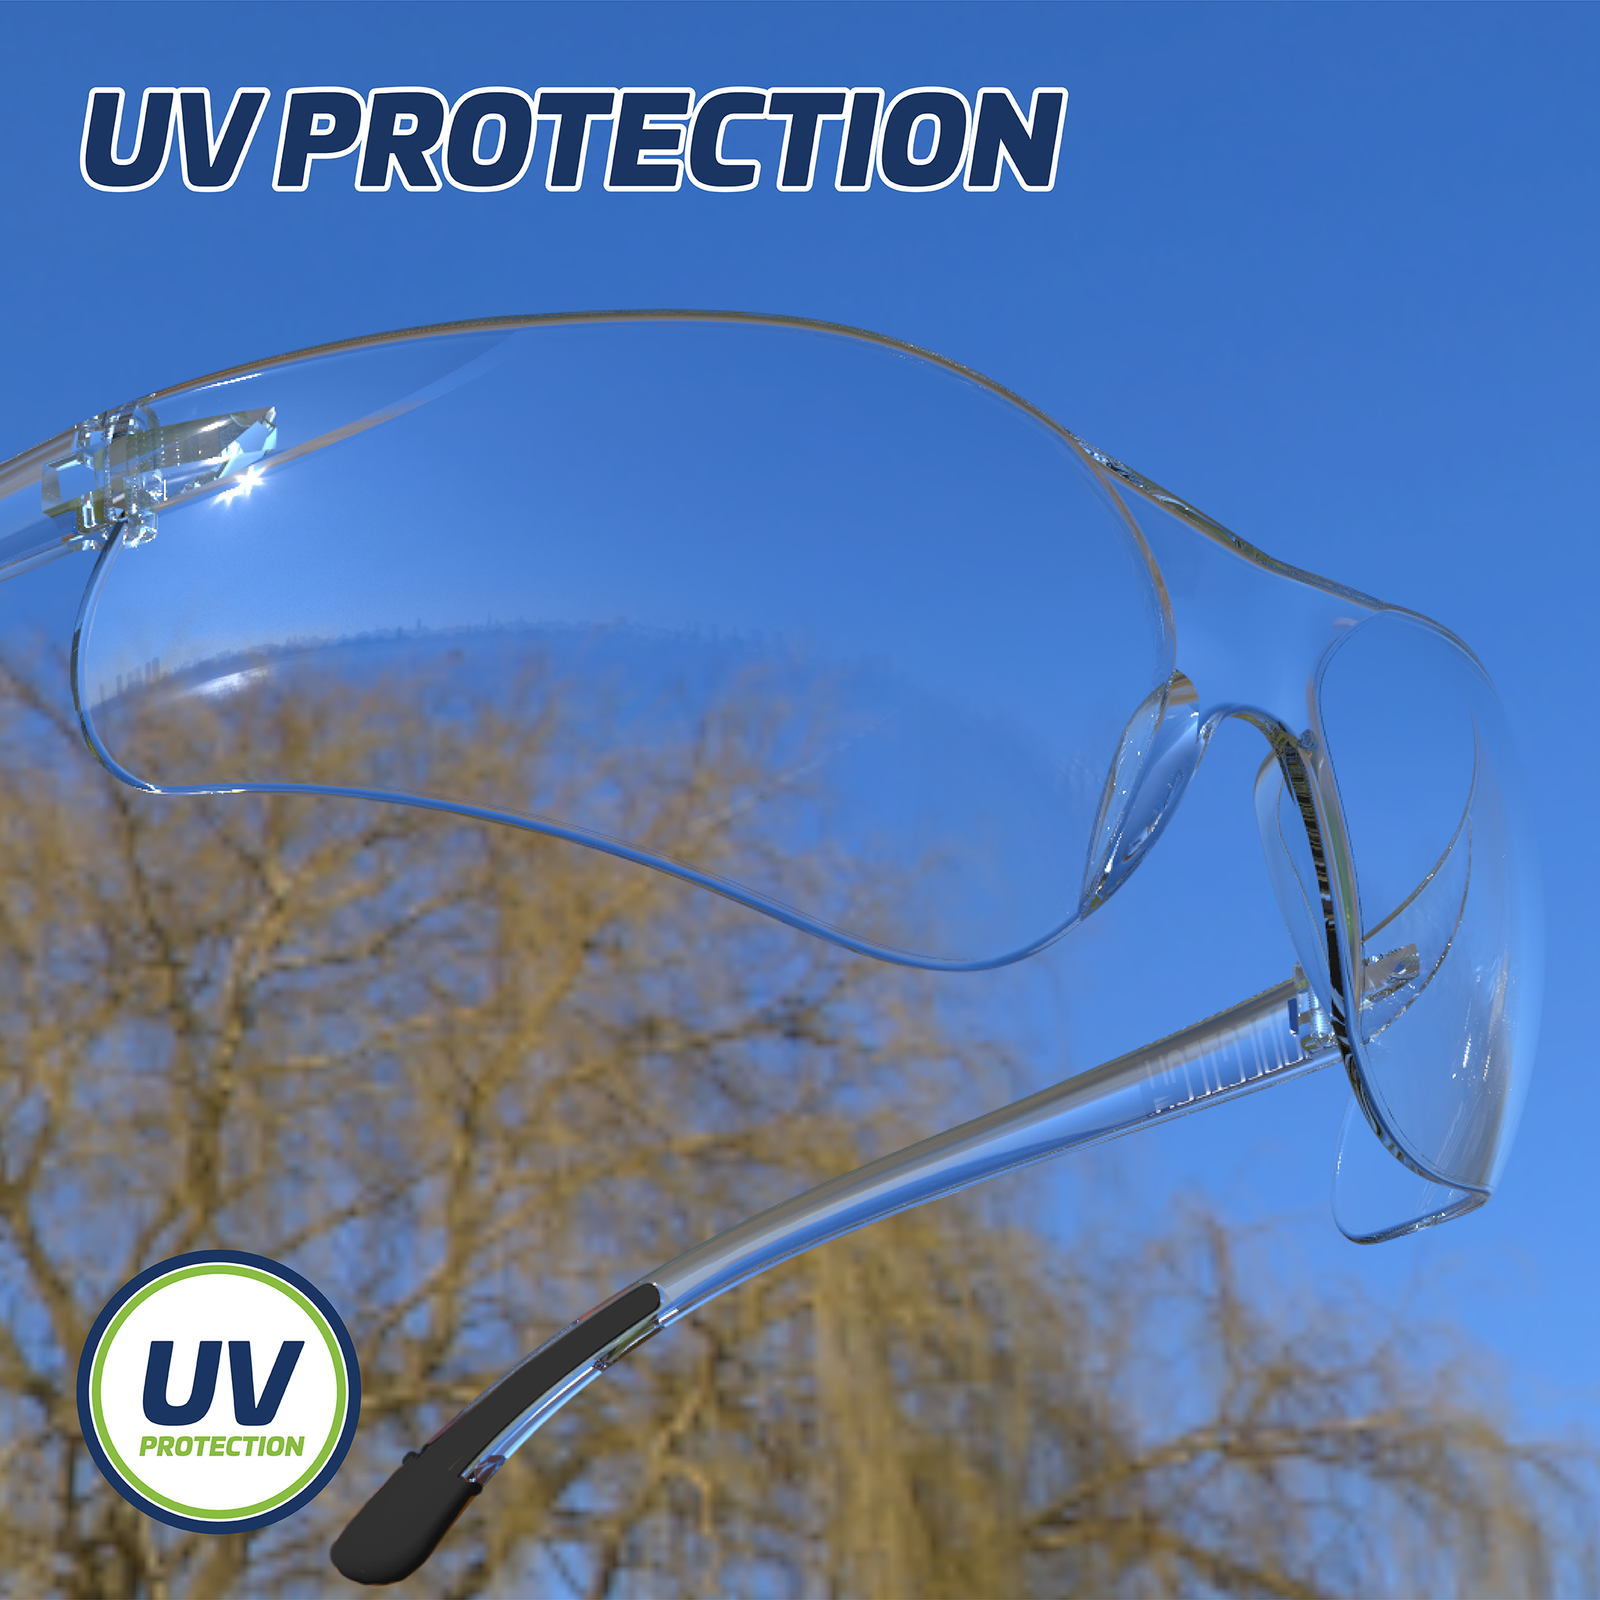 Close up view of the clear High impact Jorestech Safety glasses with a background of a blue sky and tree branches. Text Reads: UV protection.